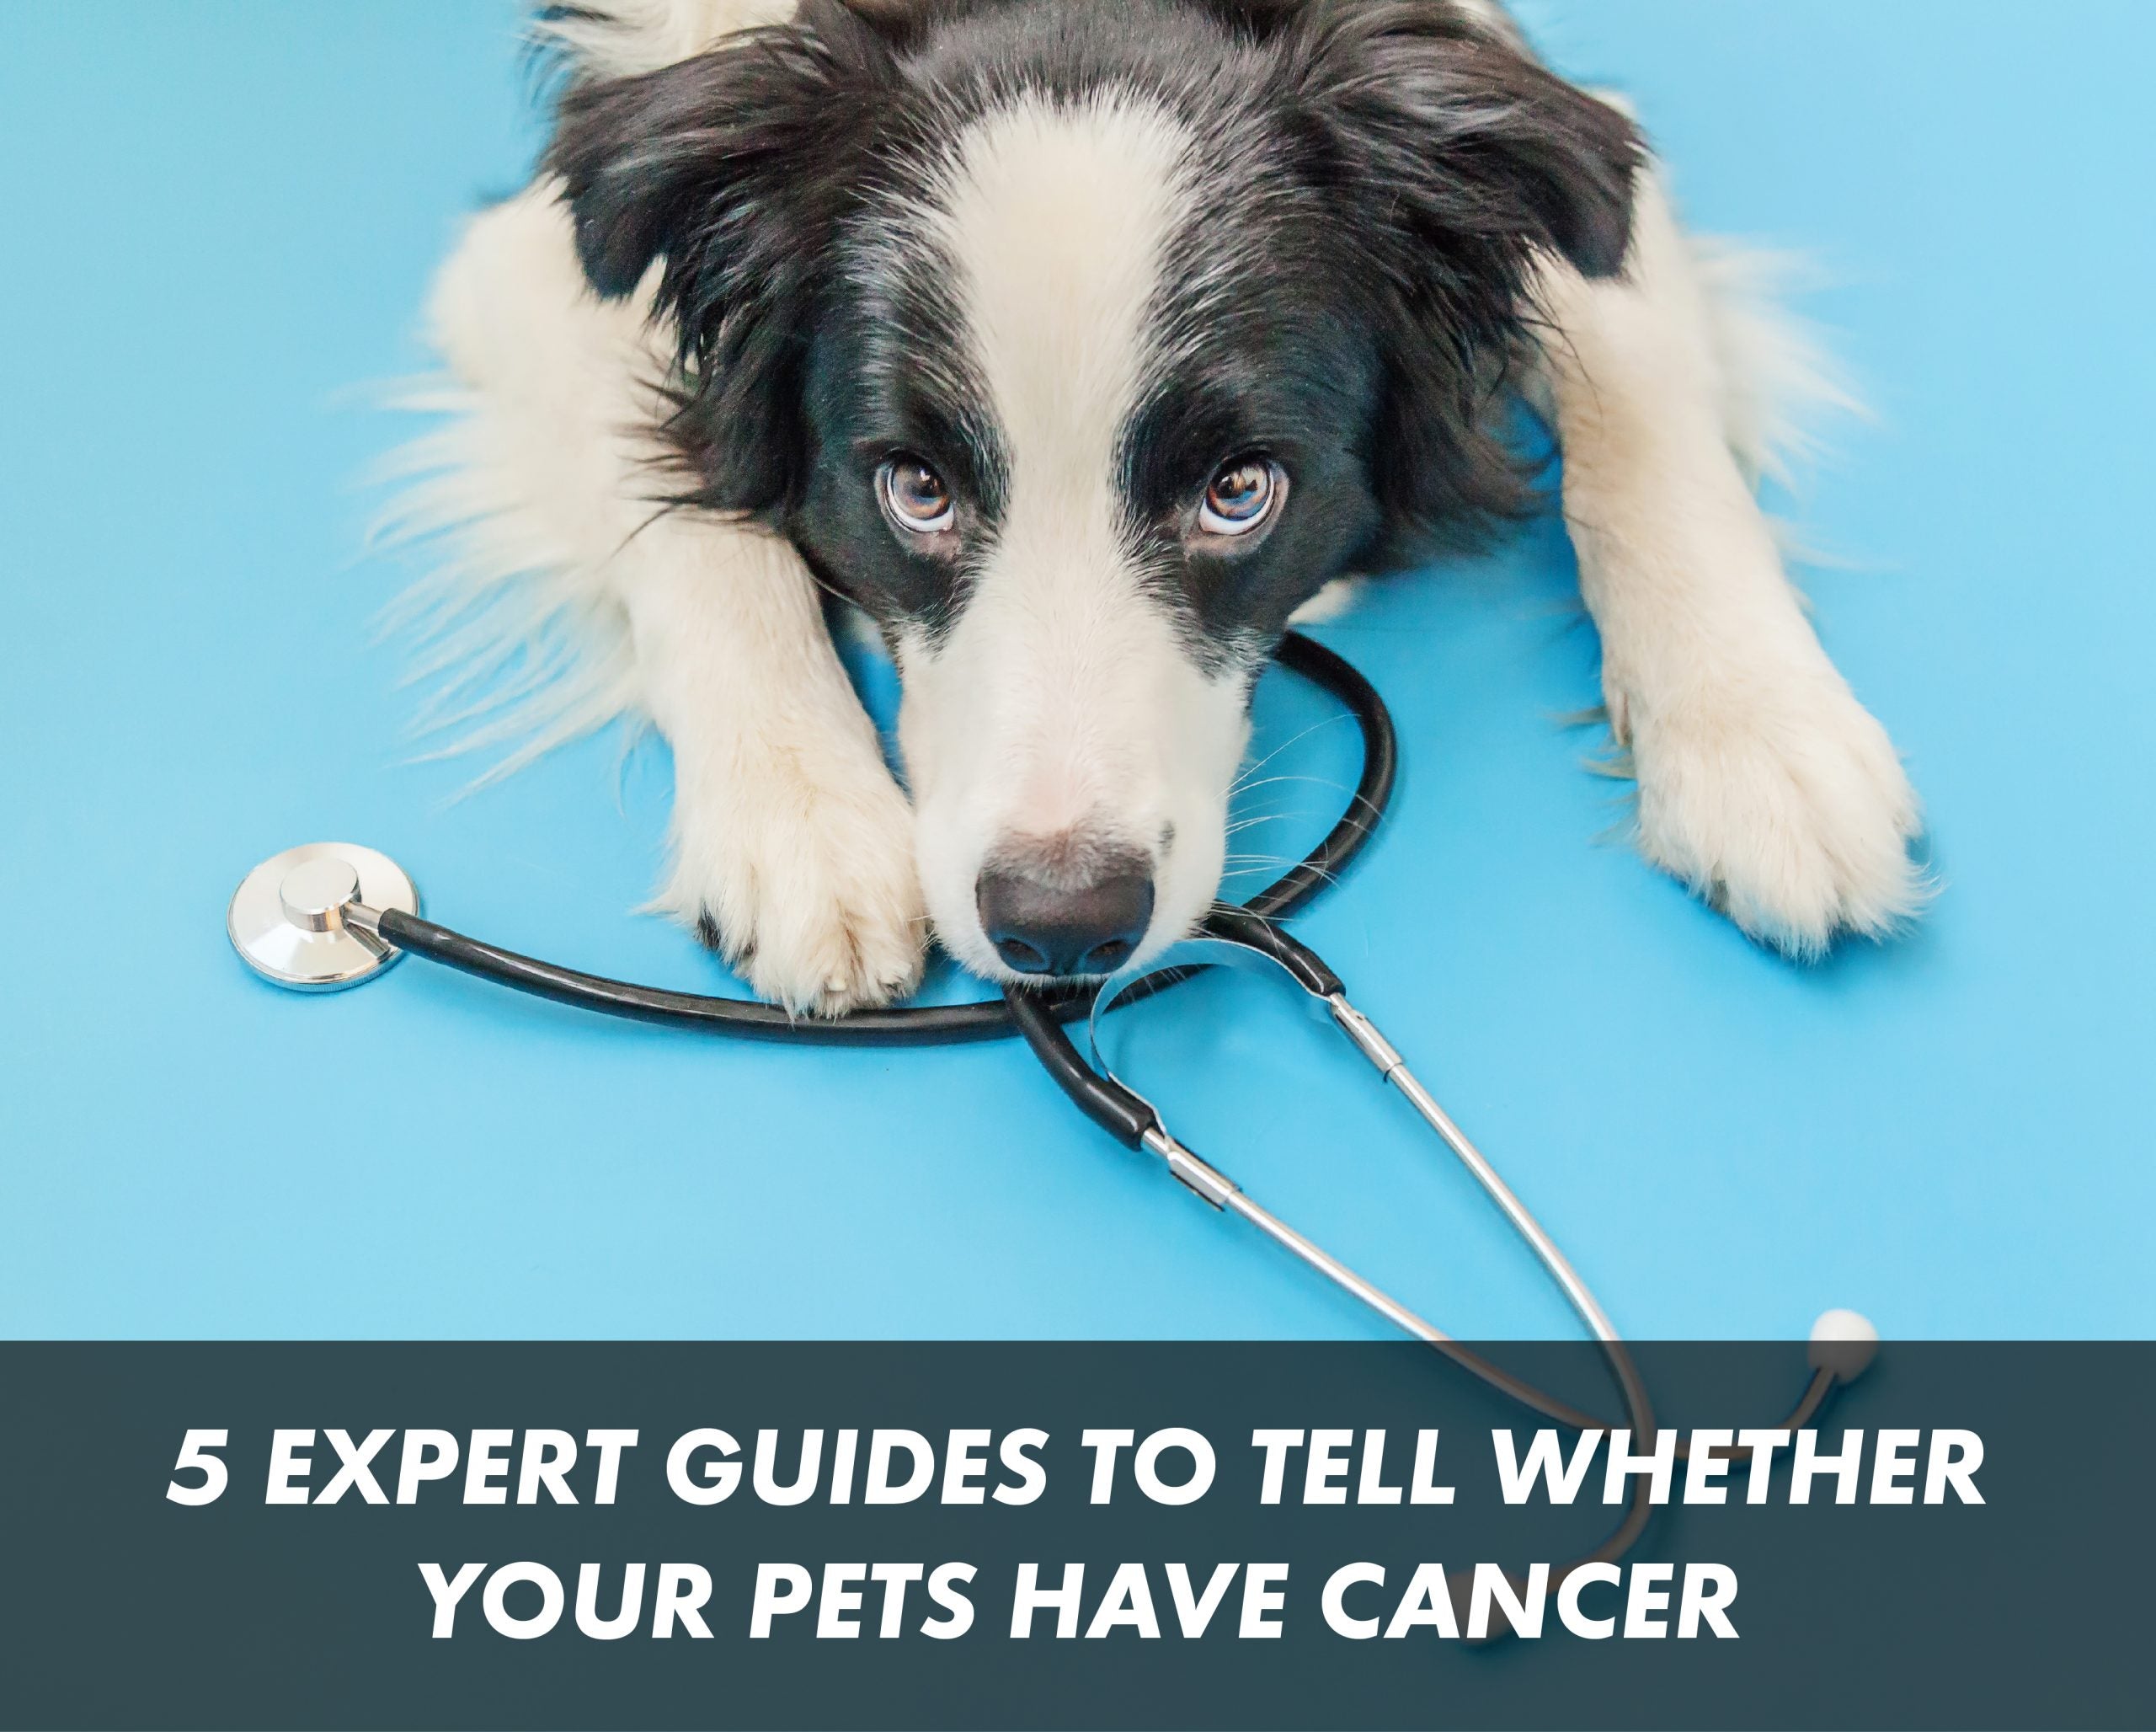 5 Expert Guides to Tell Whether Your Pets Have Cancer